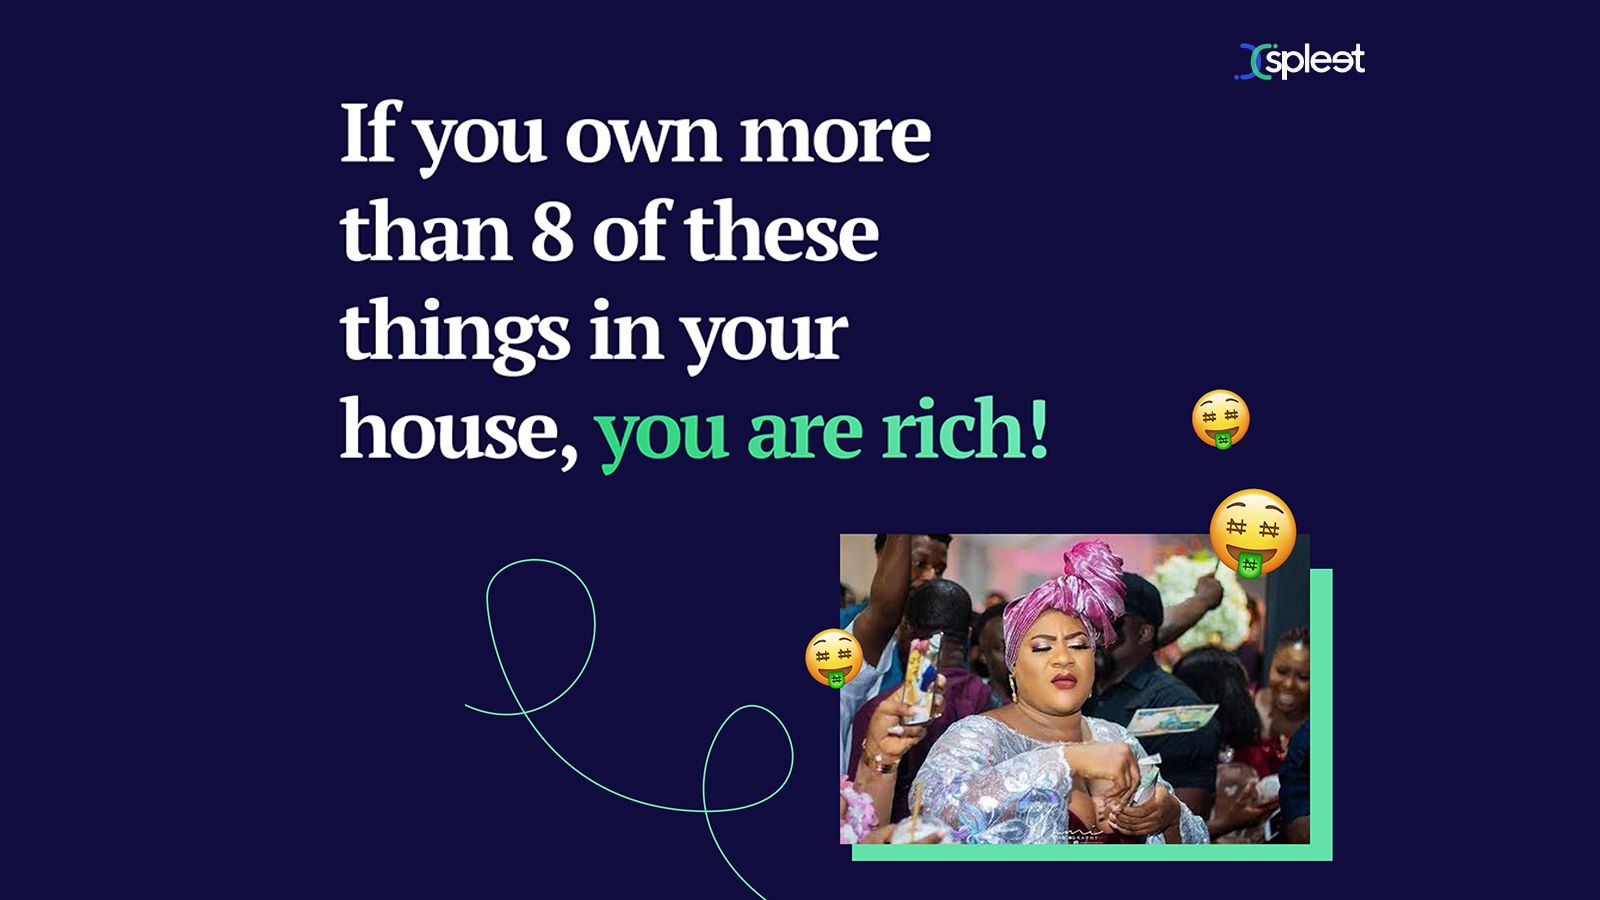 If you own more than 8 of these things in your house, you are rich.